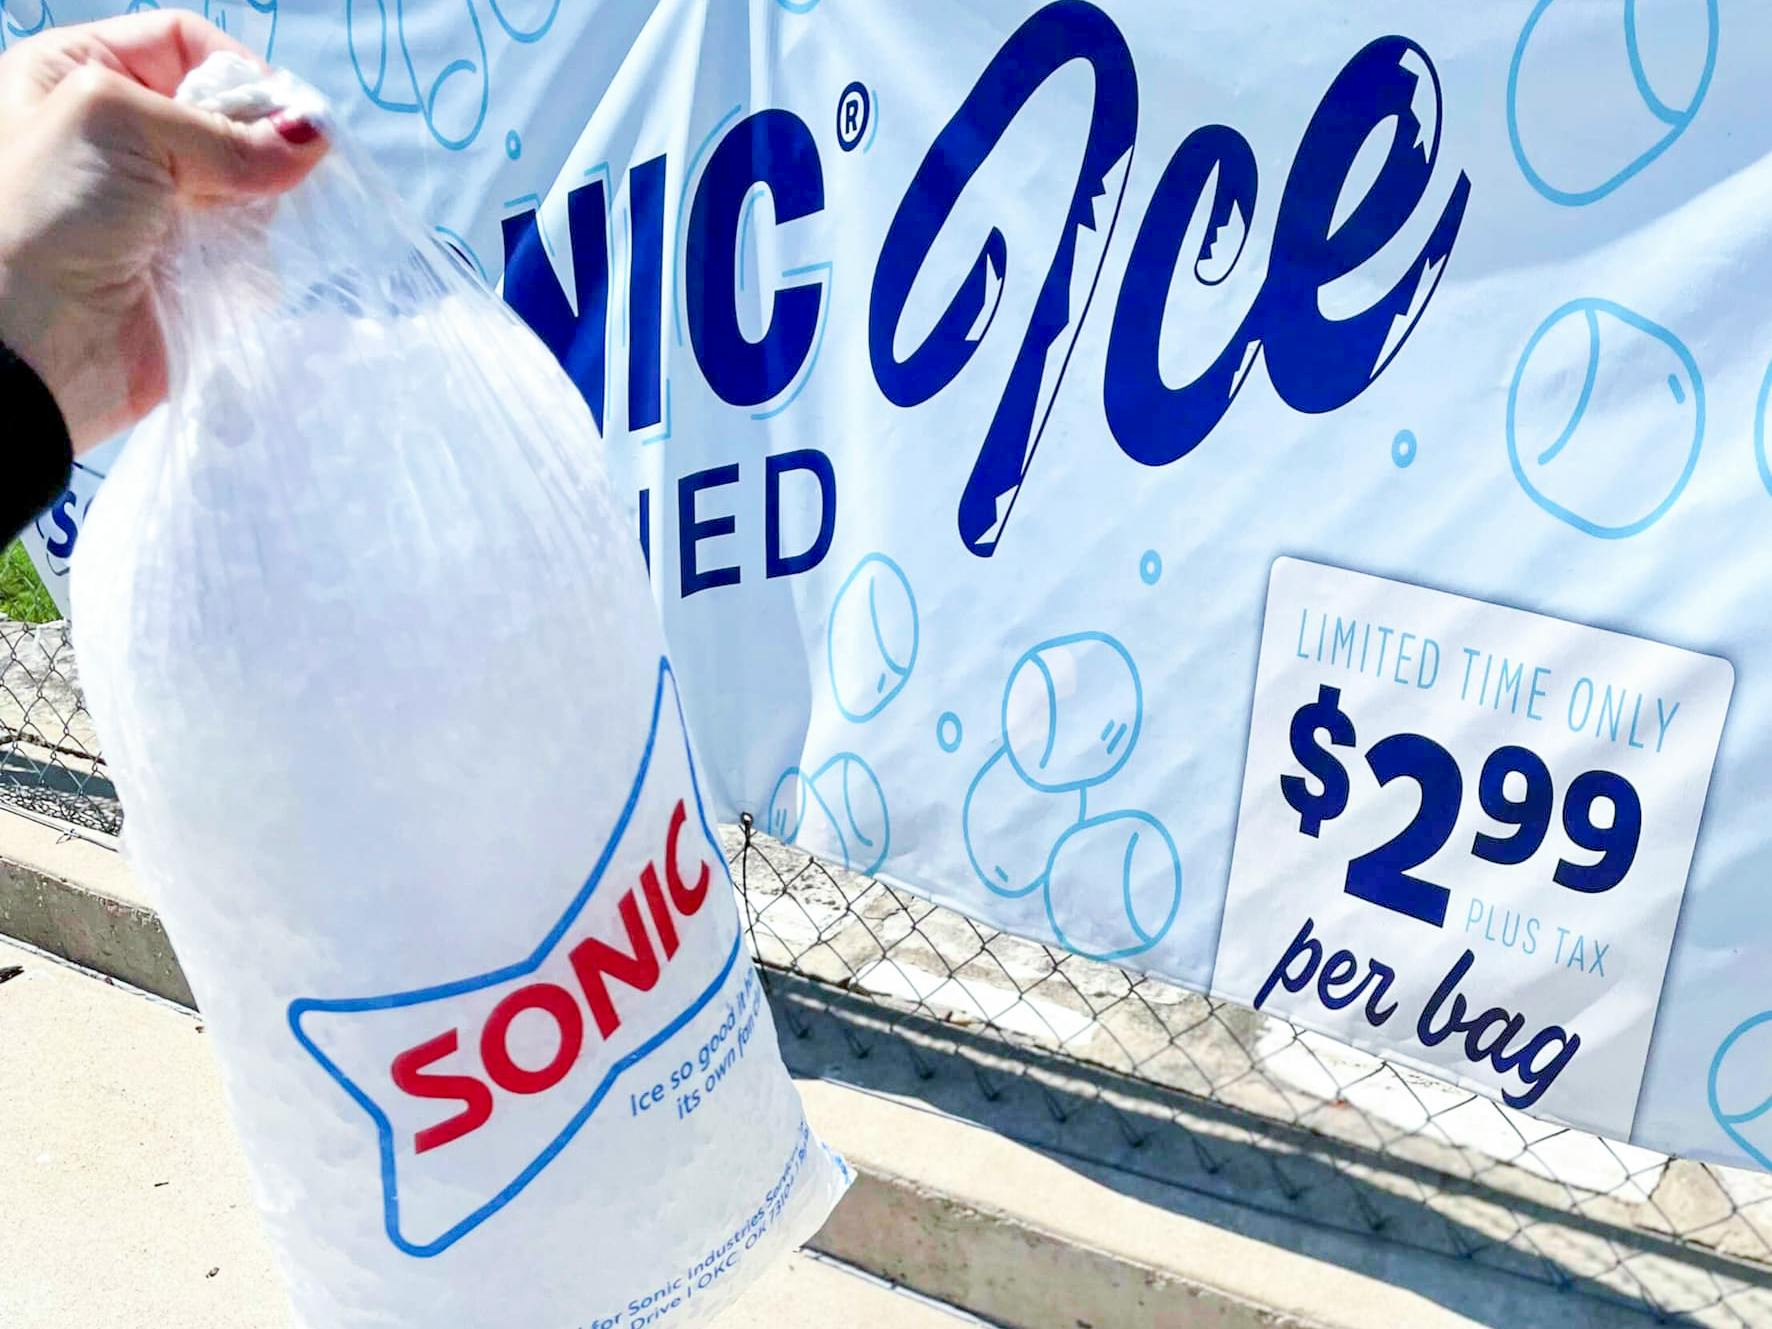 A person holding a bag of Sonic ice in front of a sign that says $2.99 per bag.